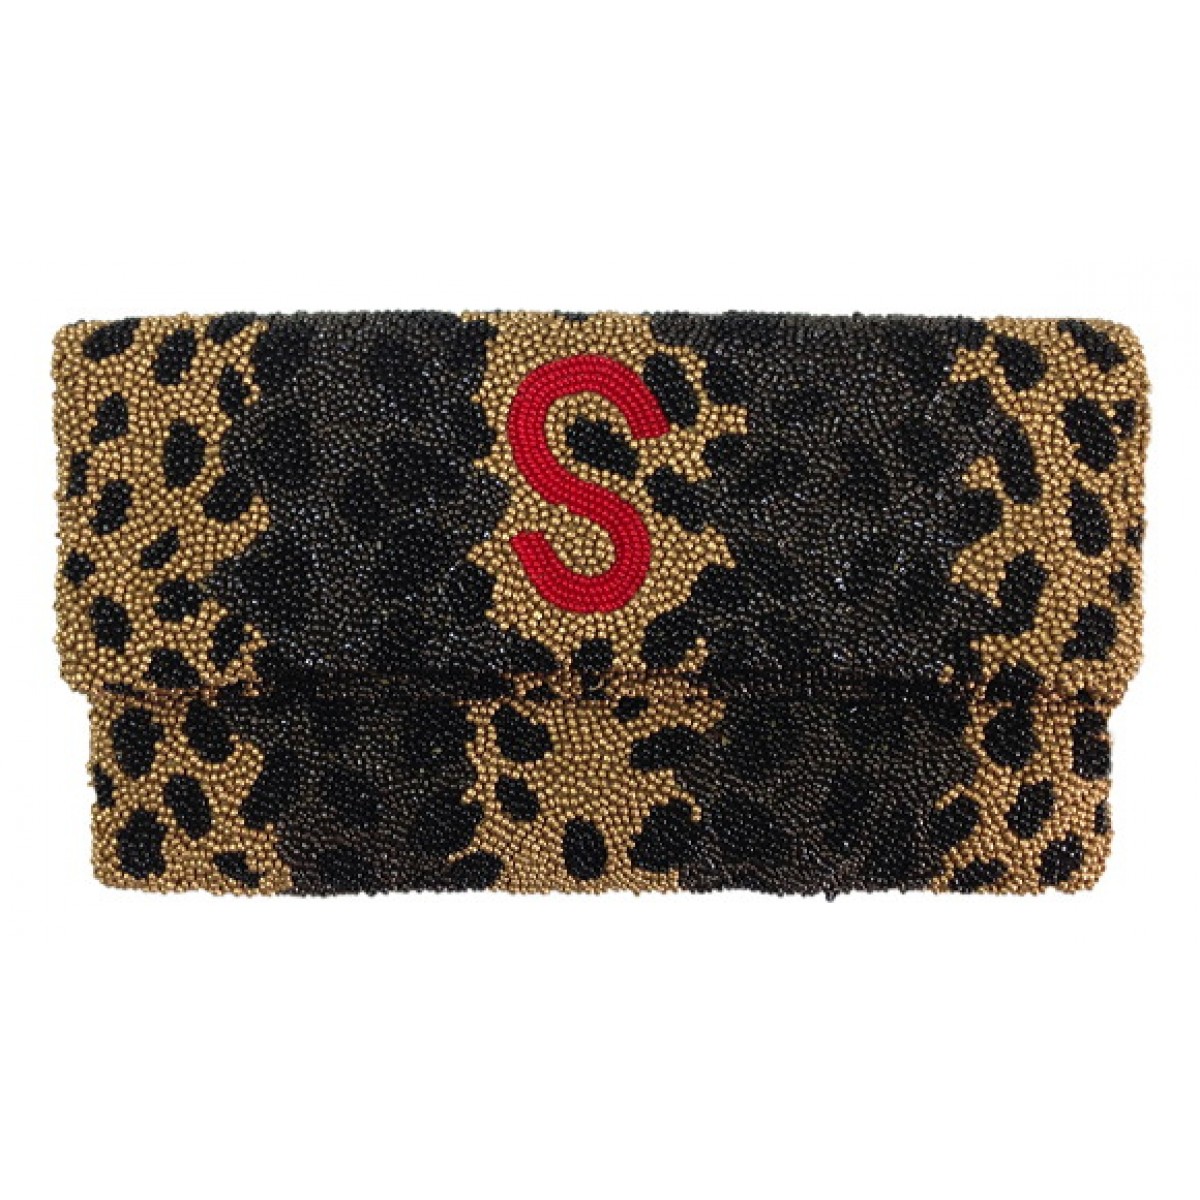 Leopard Print Clutch with Single Initial